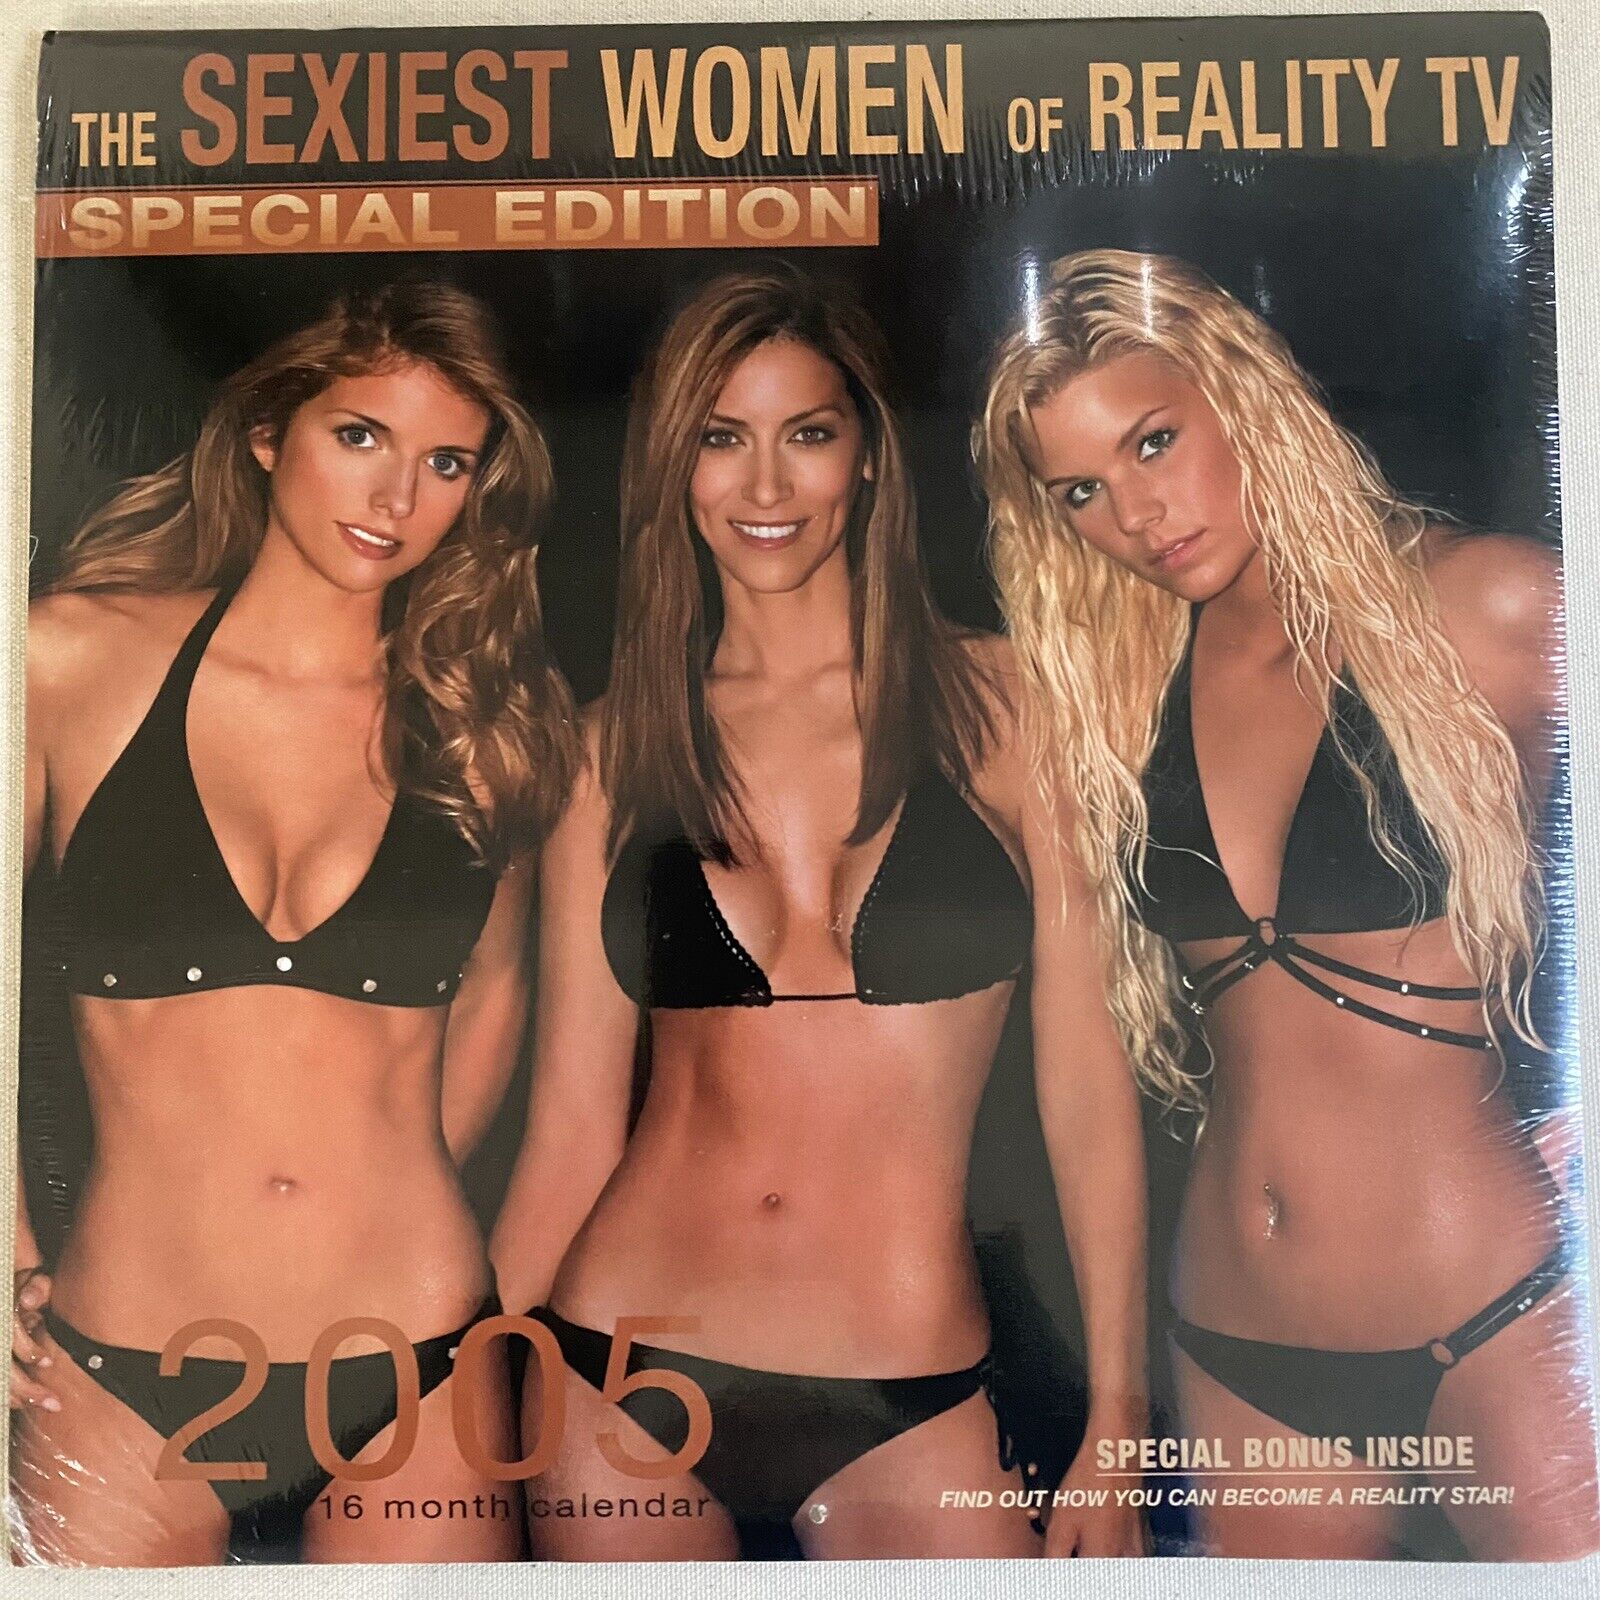 The Sexiest Women of Reality TV 2005 calendar NEW sealed special edition 16 mo